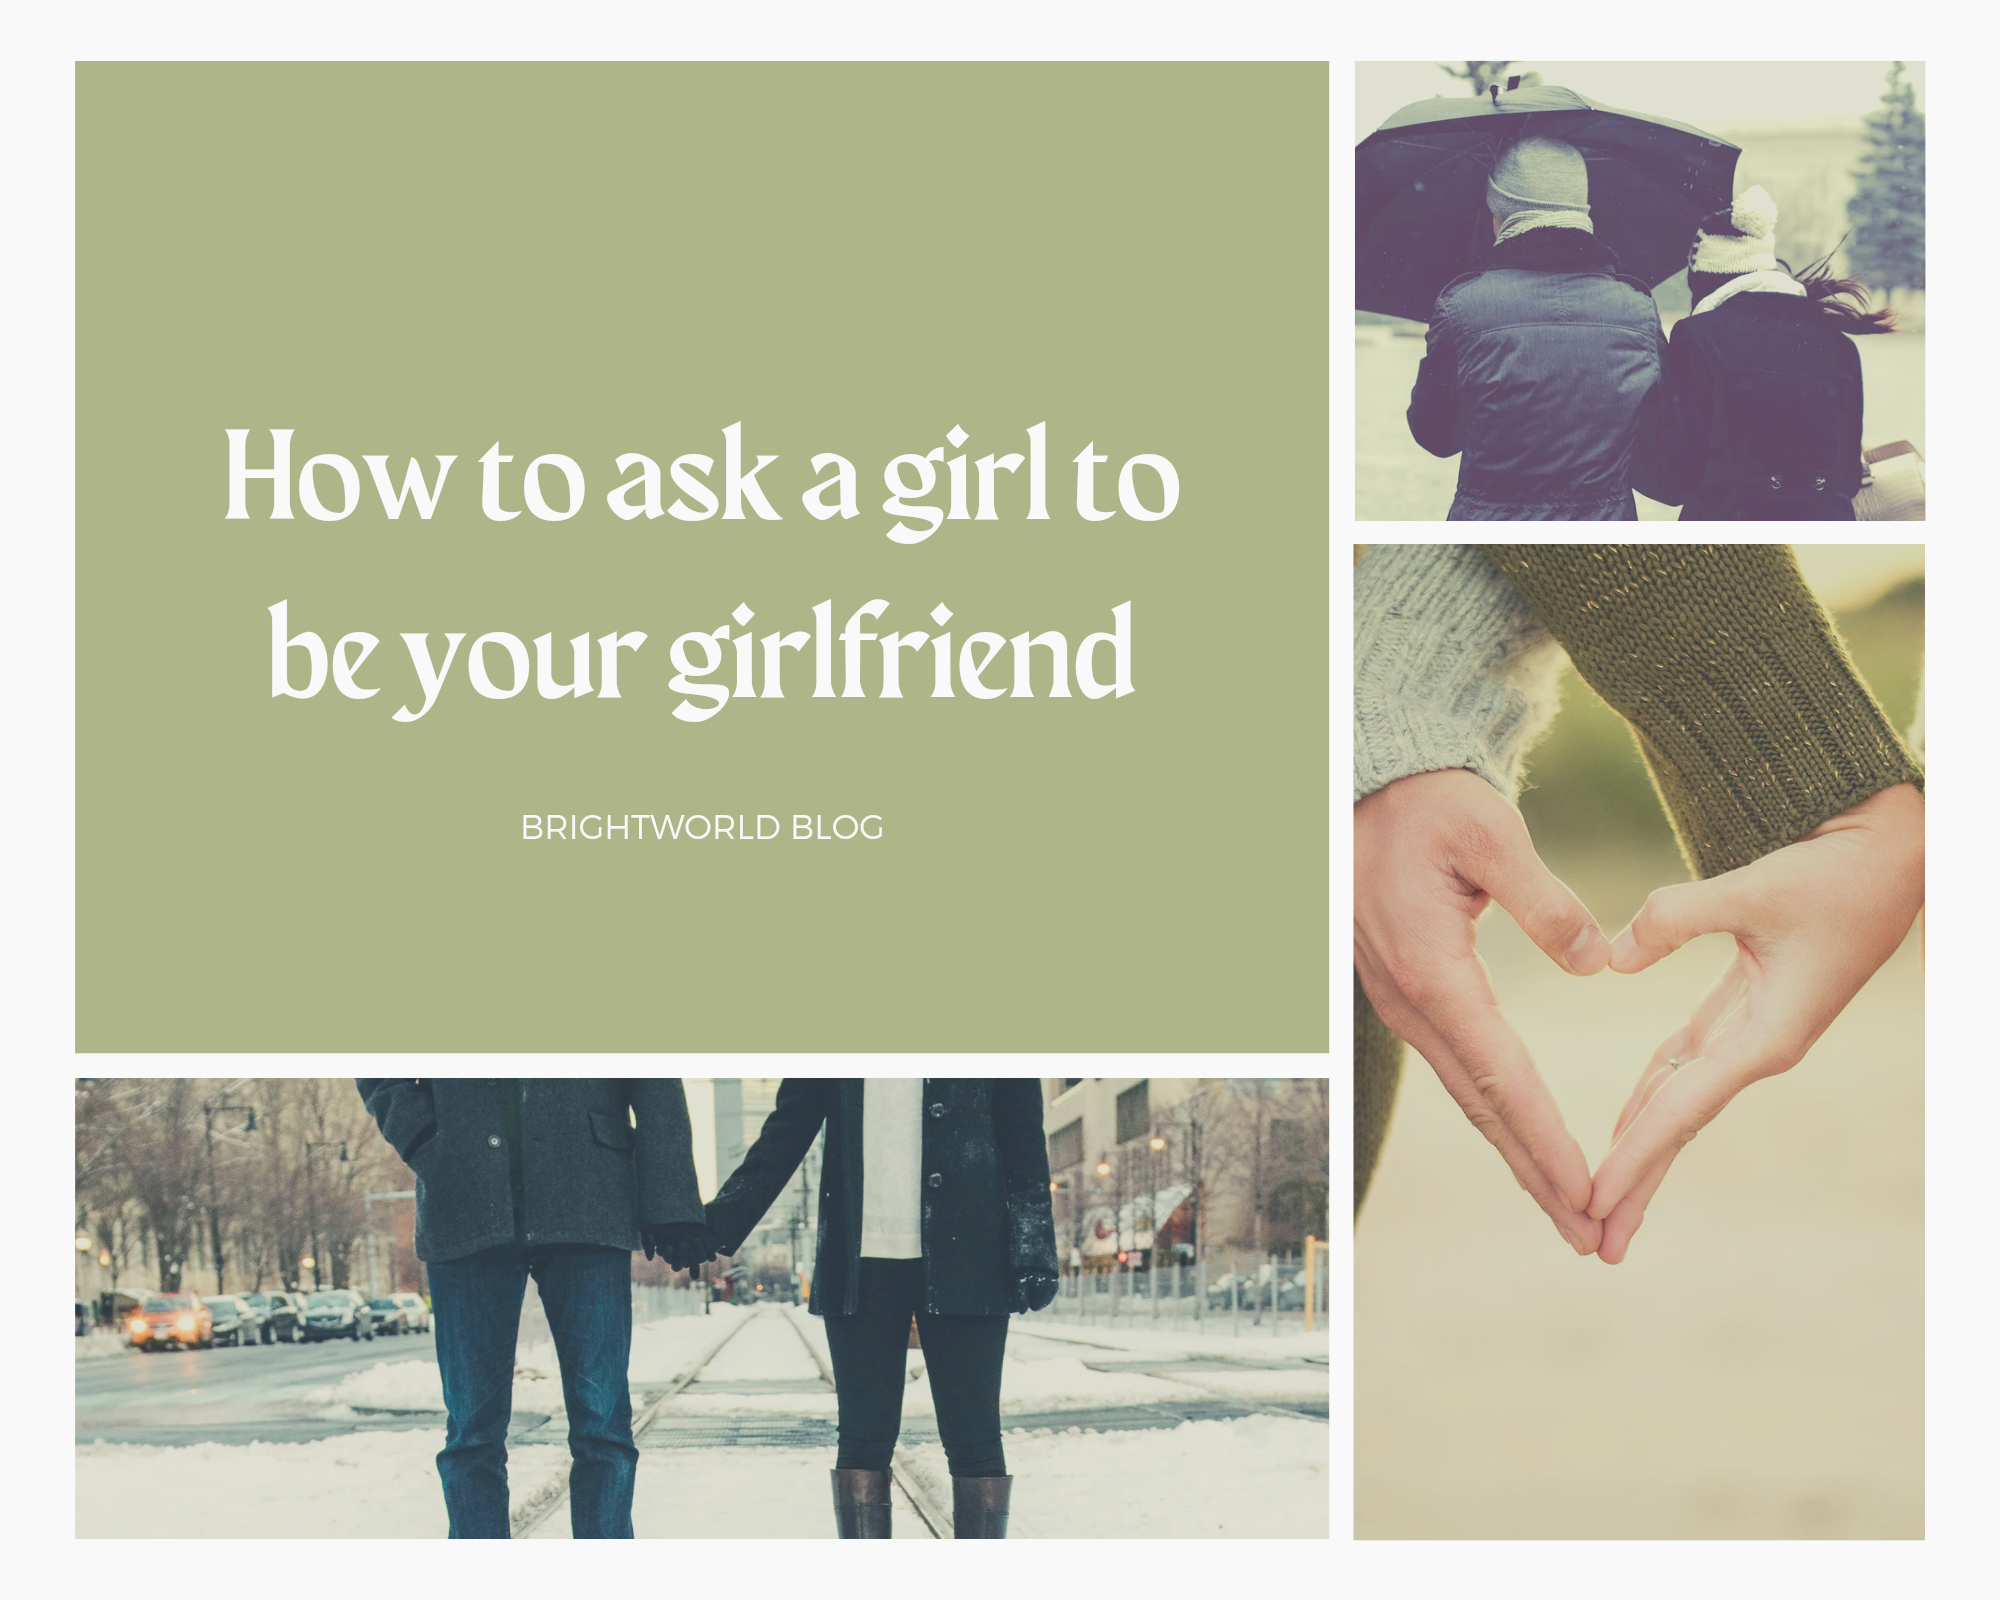 Howto ask a girl to be your girlfriend